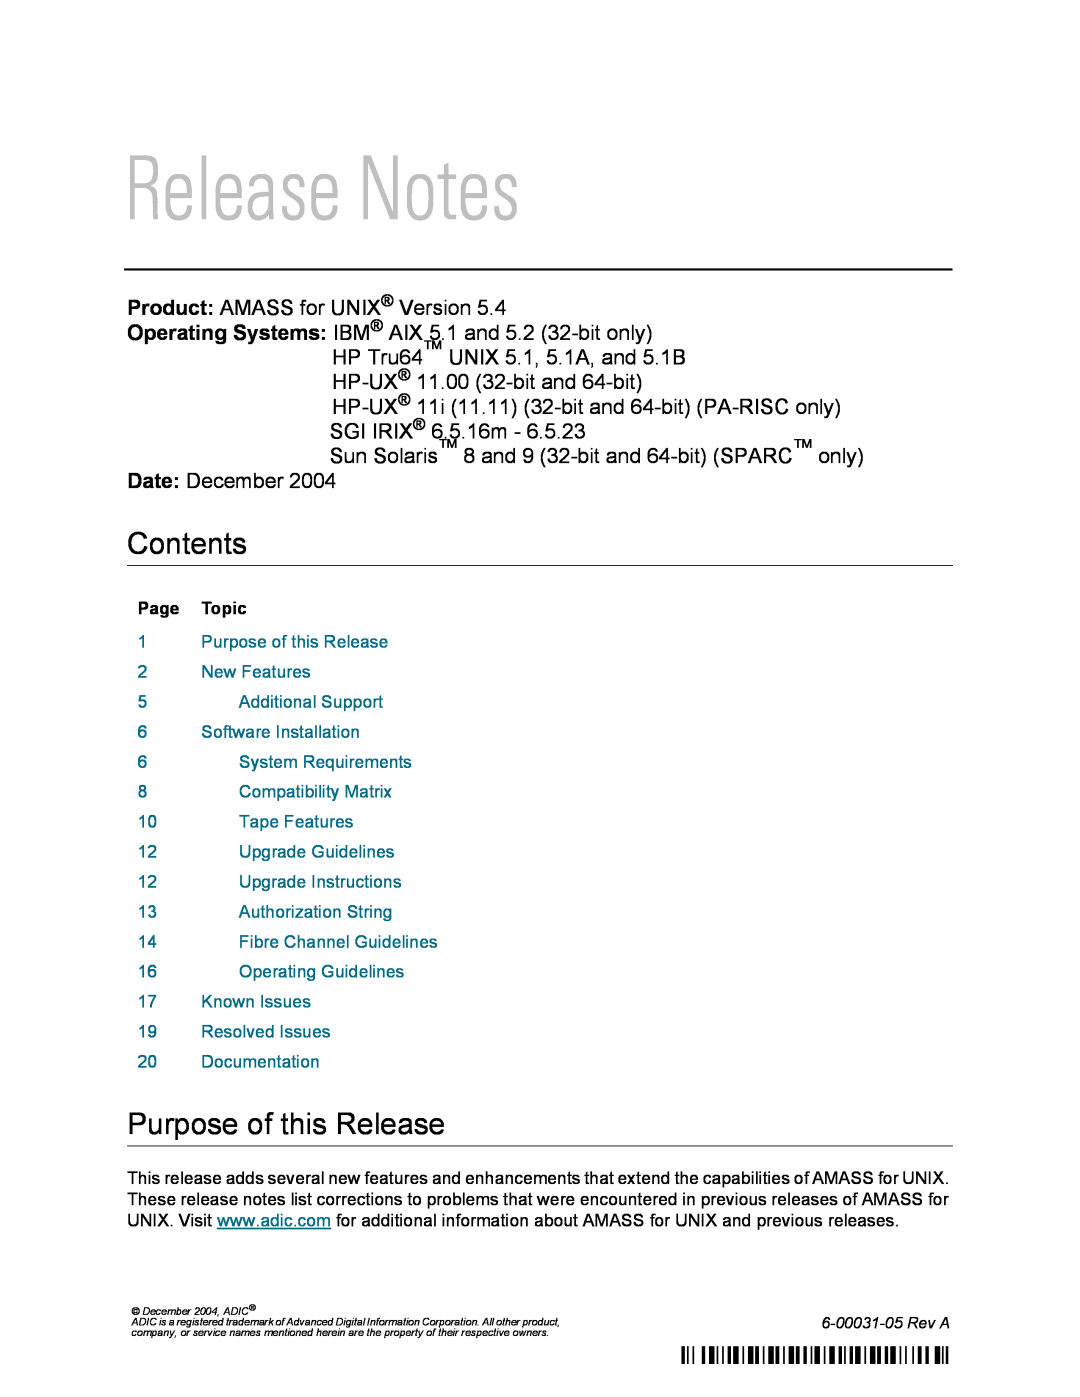 ADIC 5.4 manual Contents, Purpose of this Release, Release Notes 